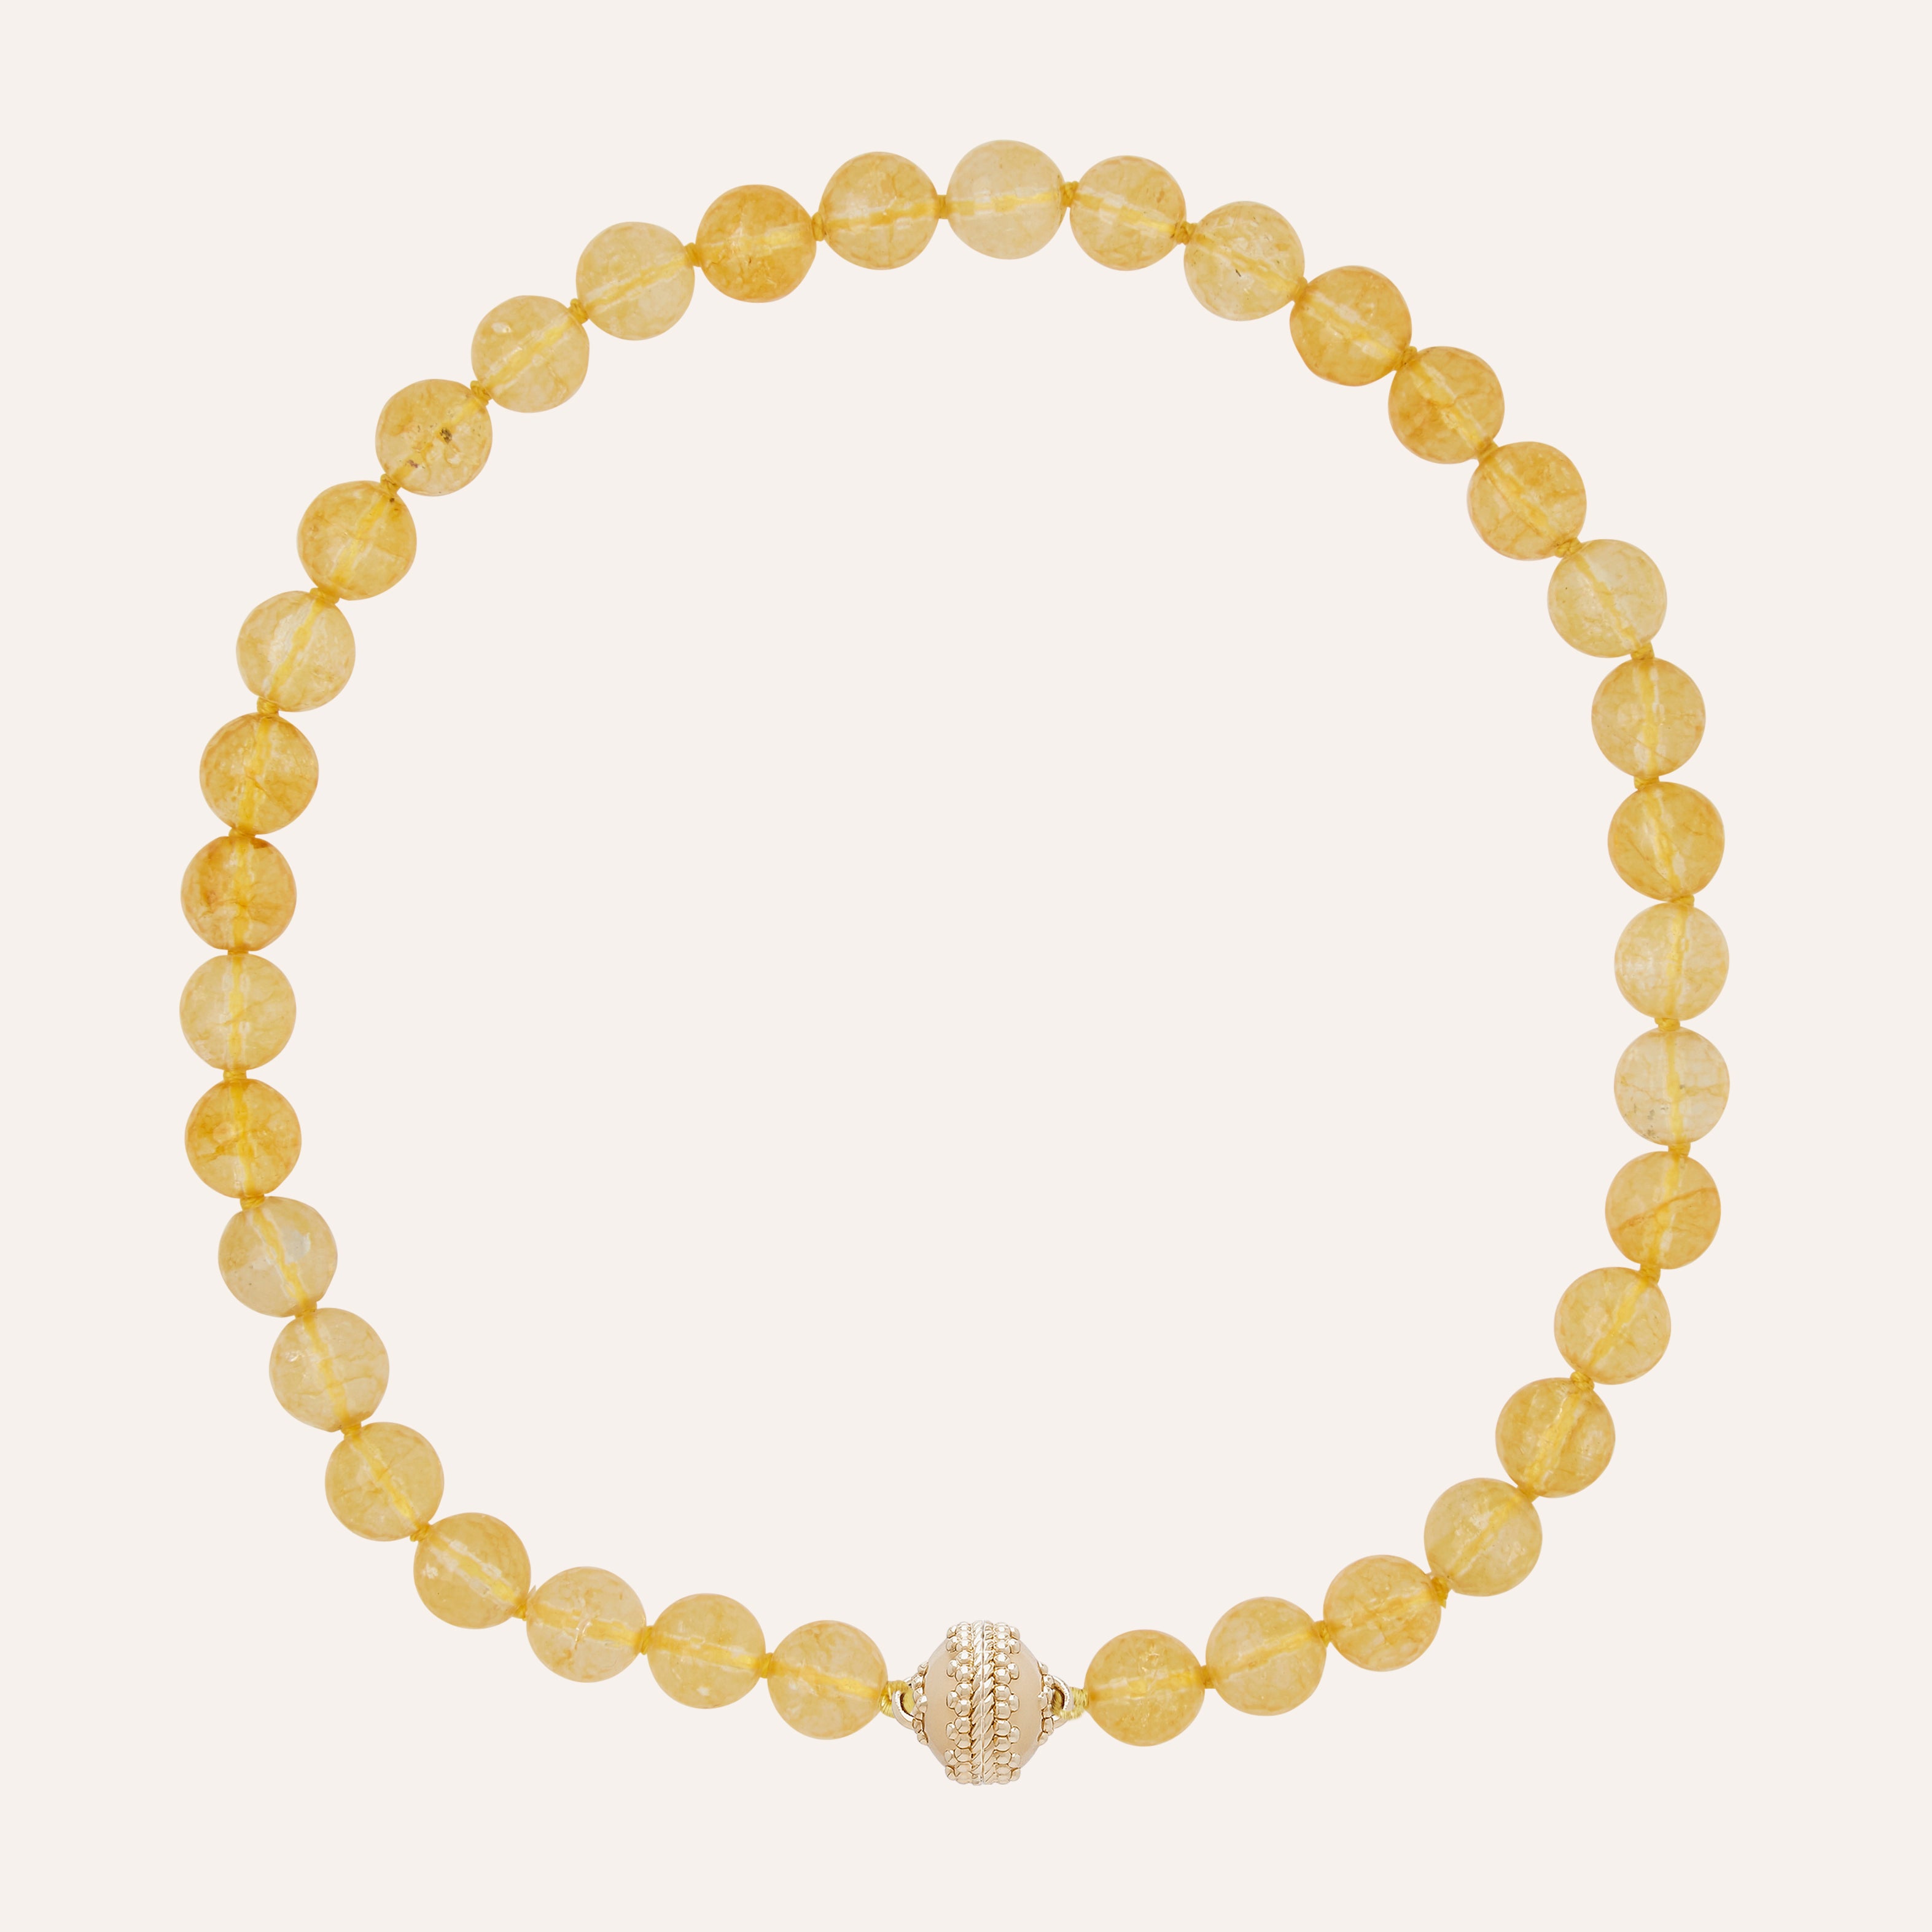 Victoire Round Faceted Citrine 10mm Necklace